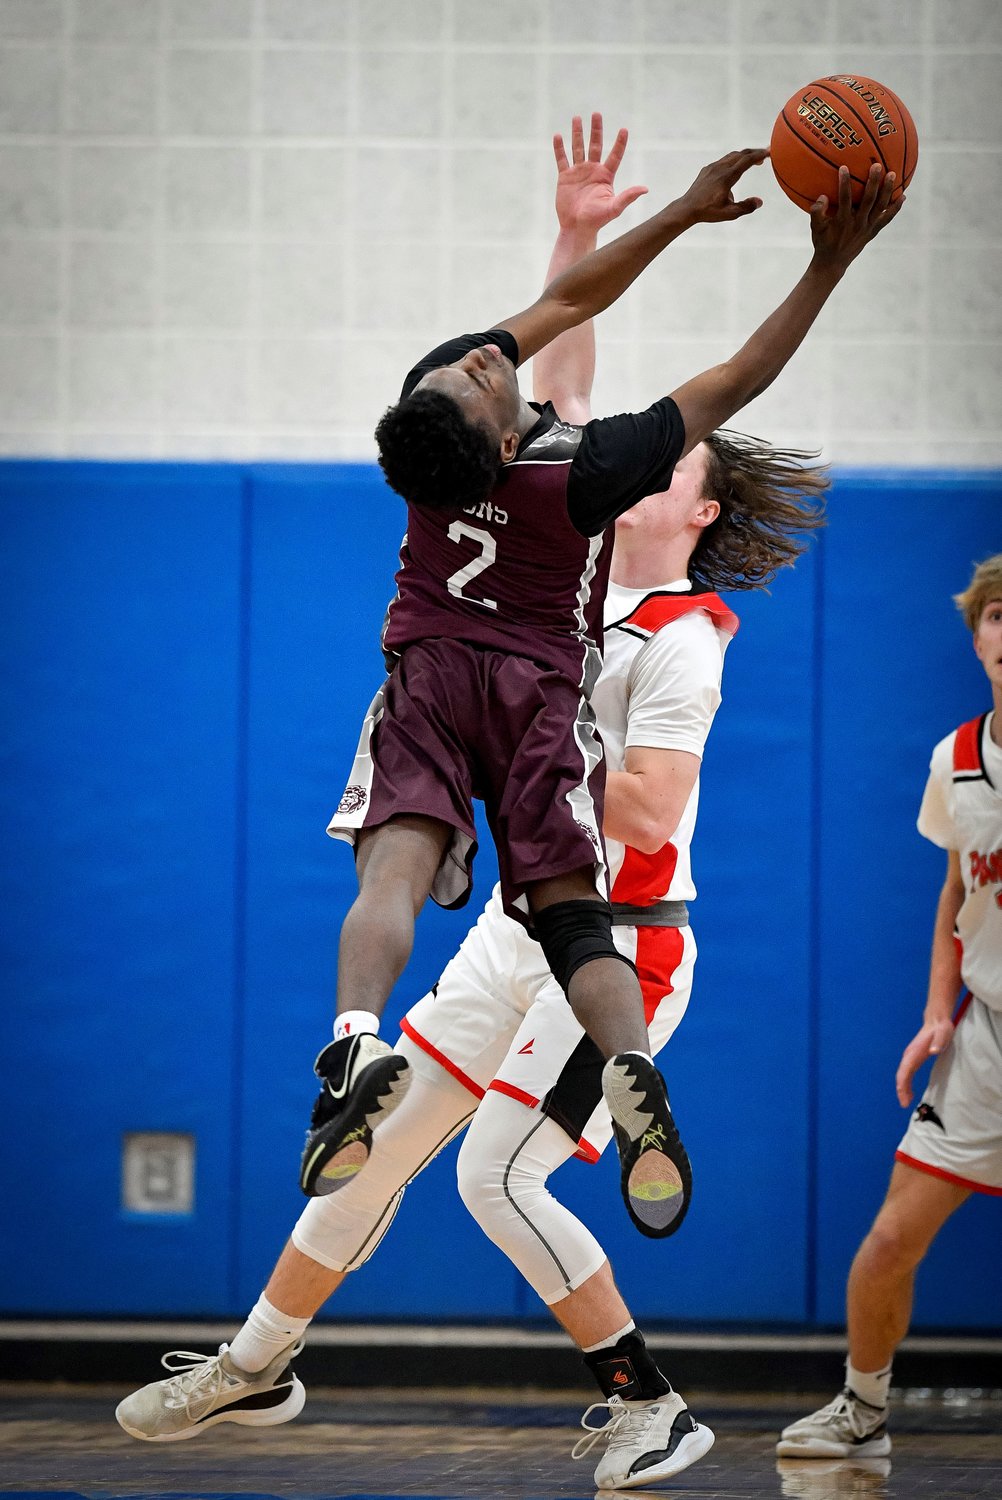 Faith’s Gerald Pinkney bends backwards for a rebound in front of Plumstead’s Jackson Mott.